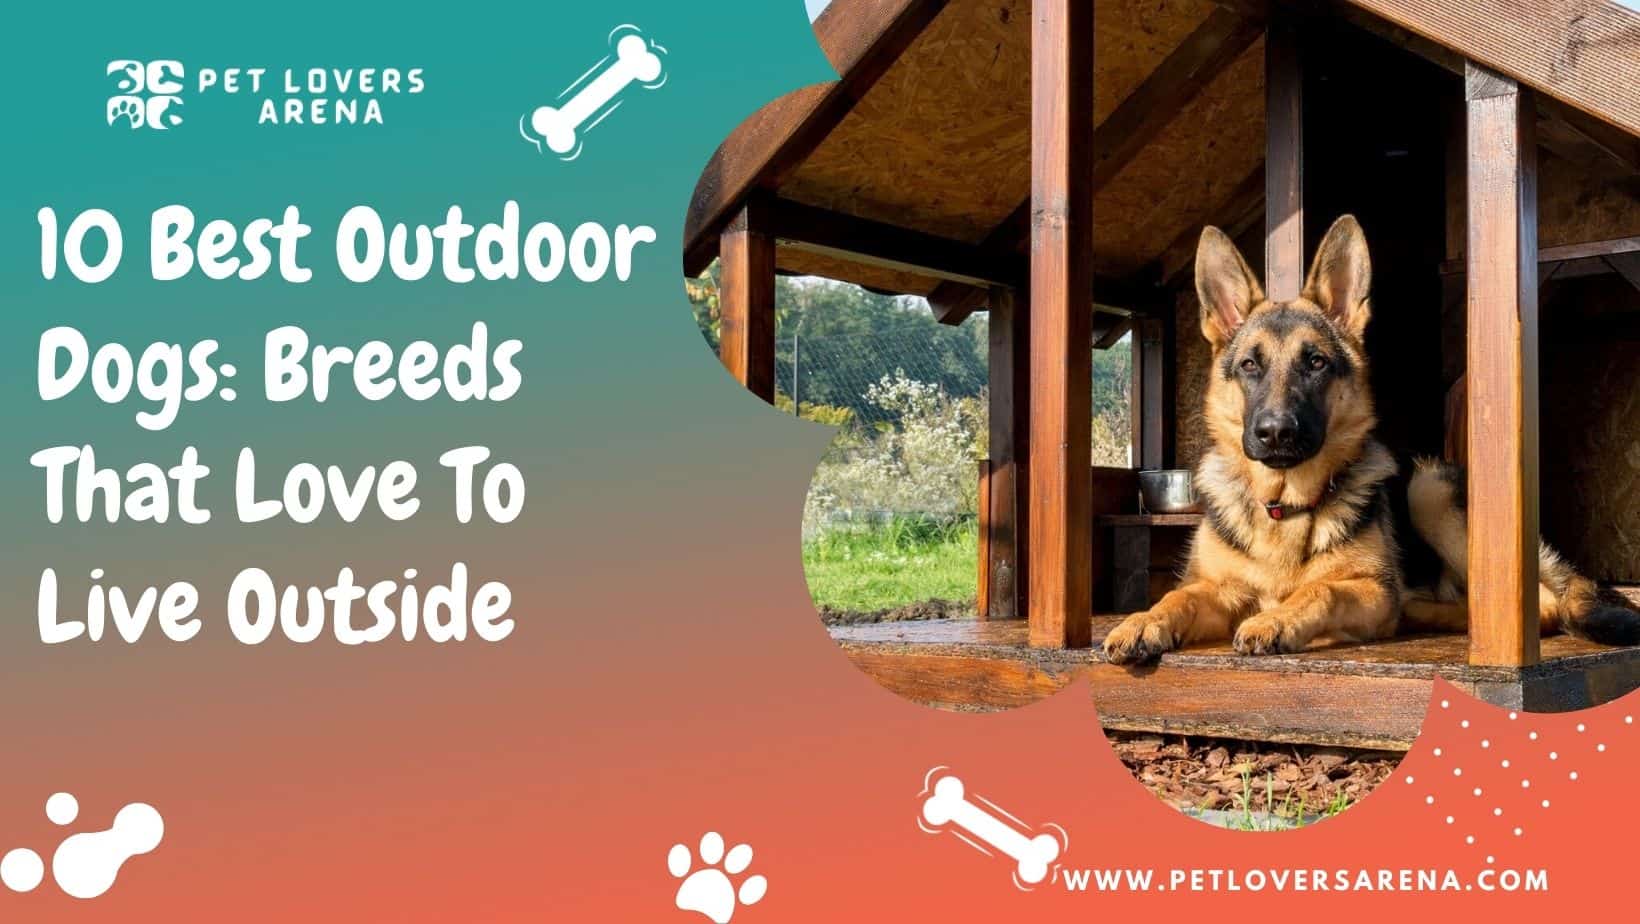 10 Best Outdoor Dogs: Breeds That Love to Live Outside